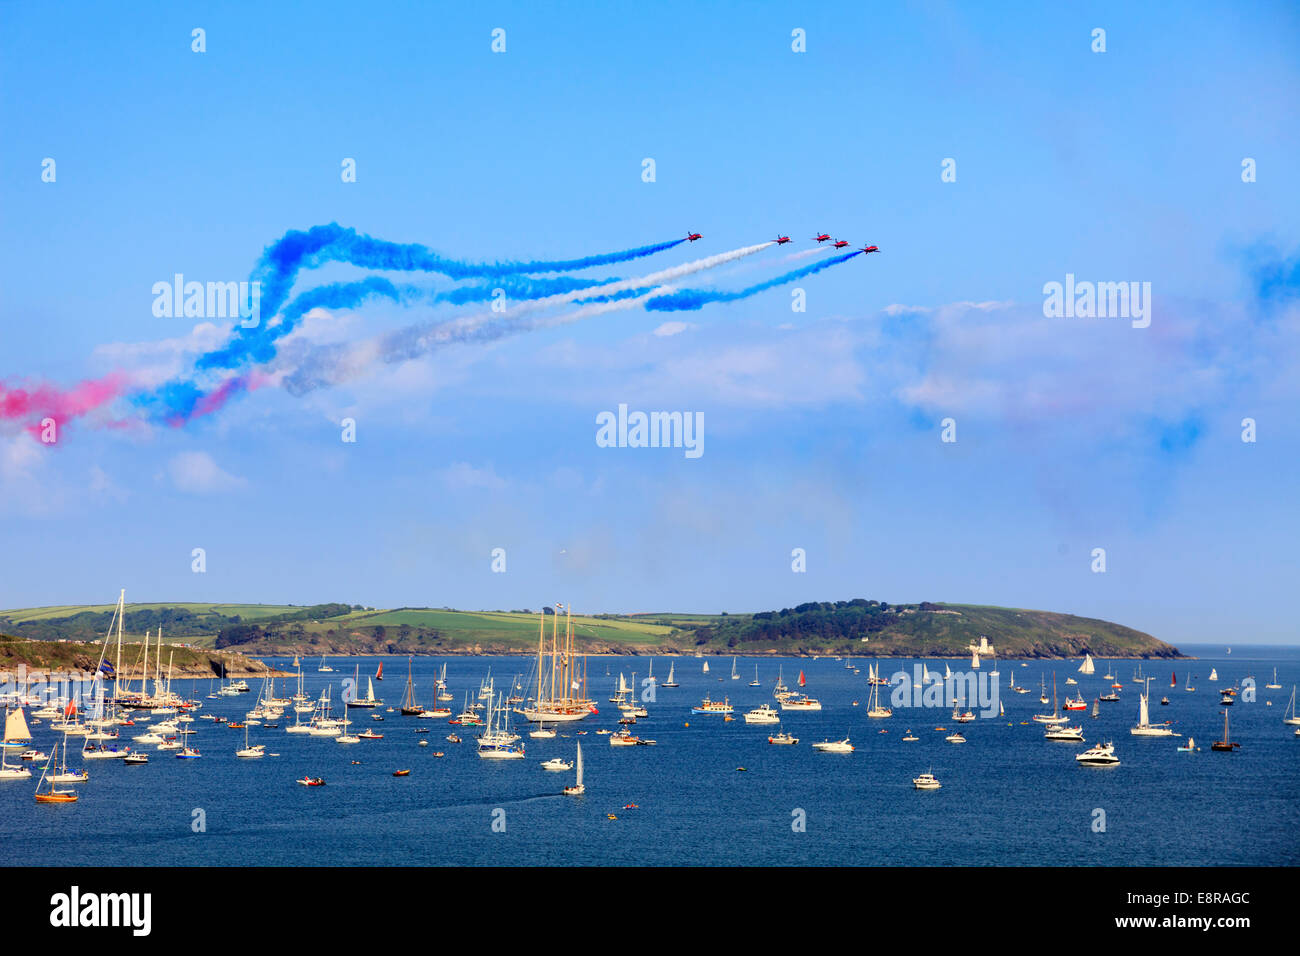 The Red Arrows over Falmouth Bay in Cornwall. Stock Photo